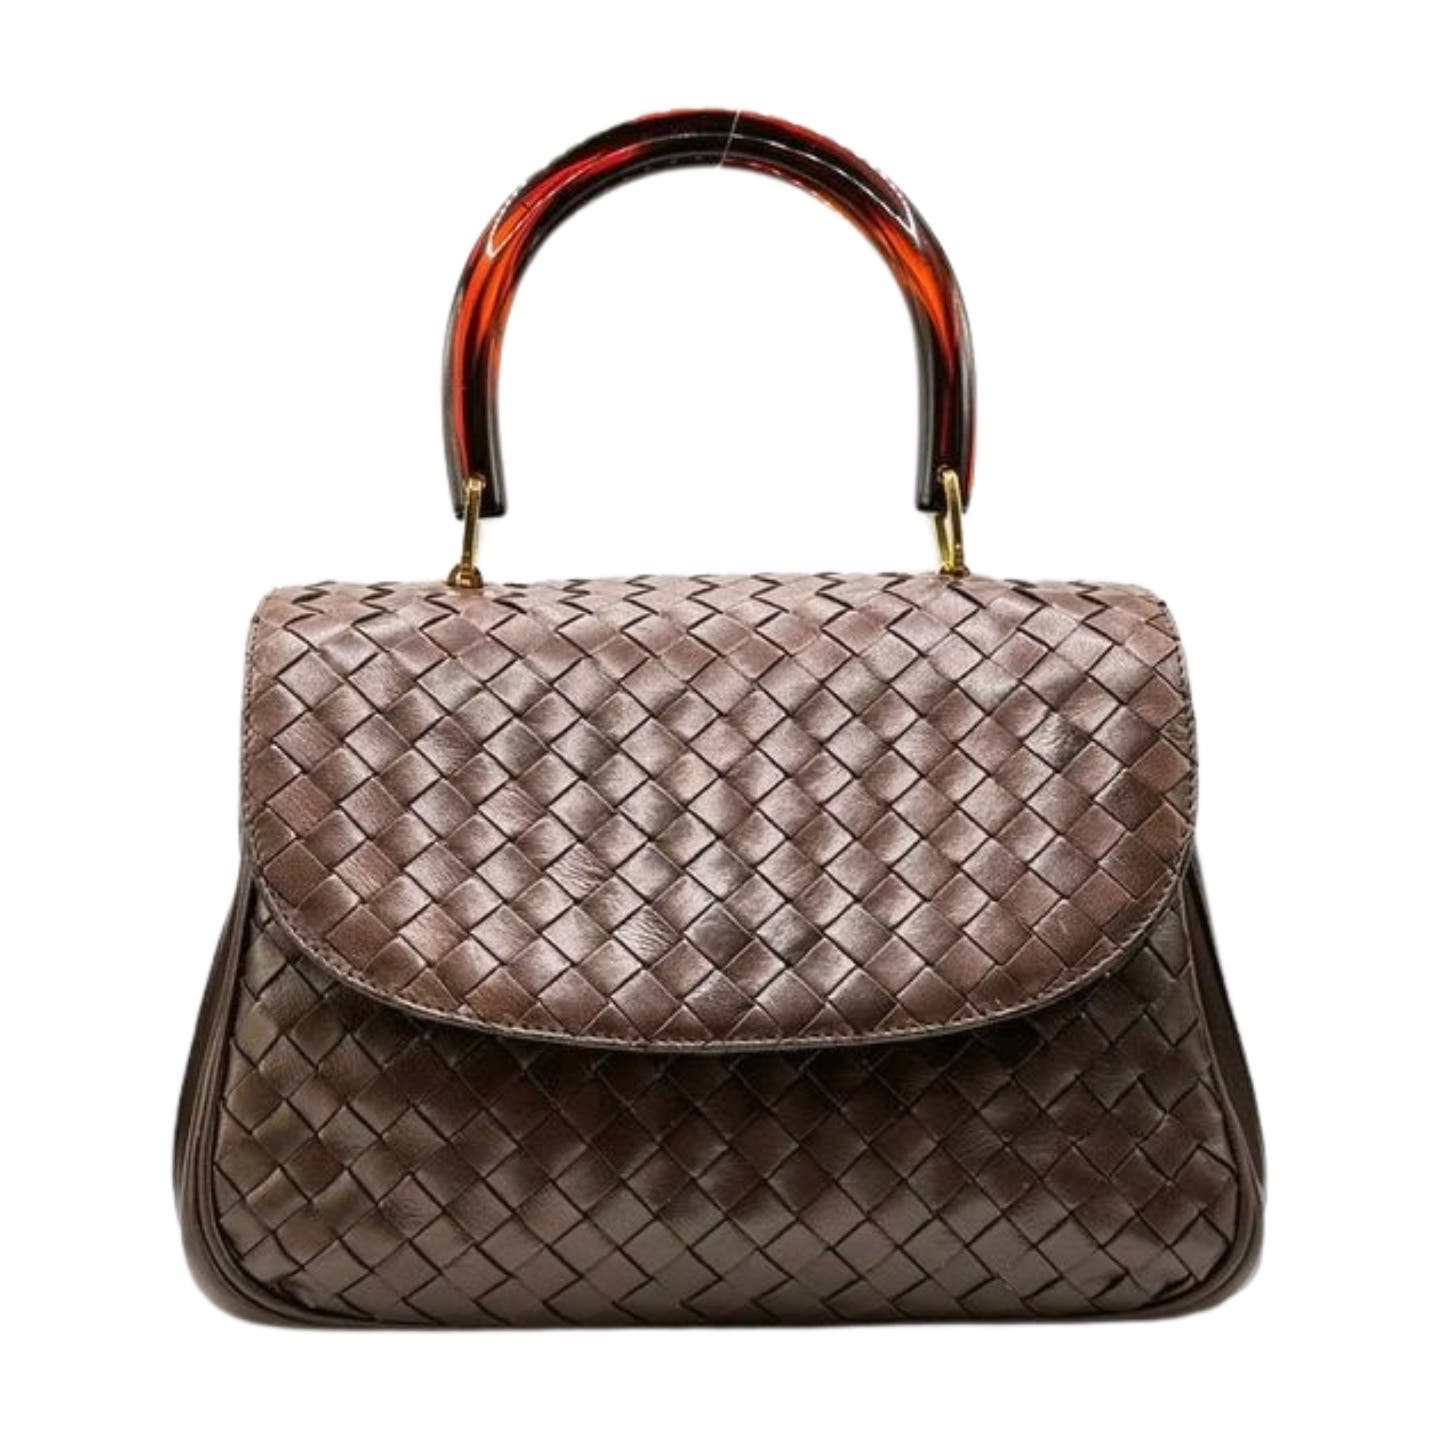 A brown woven lambskin leather handbag with a flap closure and a sturdy handle that has a glossy finish with hints of red. This Bottega Veneta Intrecciato Top Handle Bag is structured and elegant, suitable for formal or casual use.